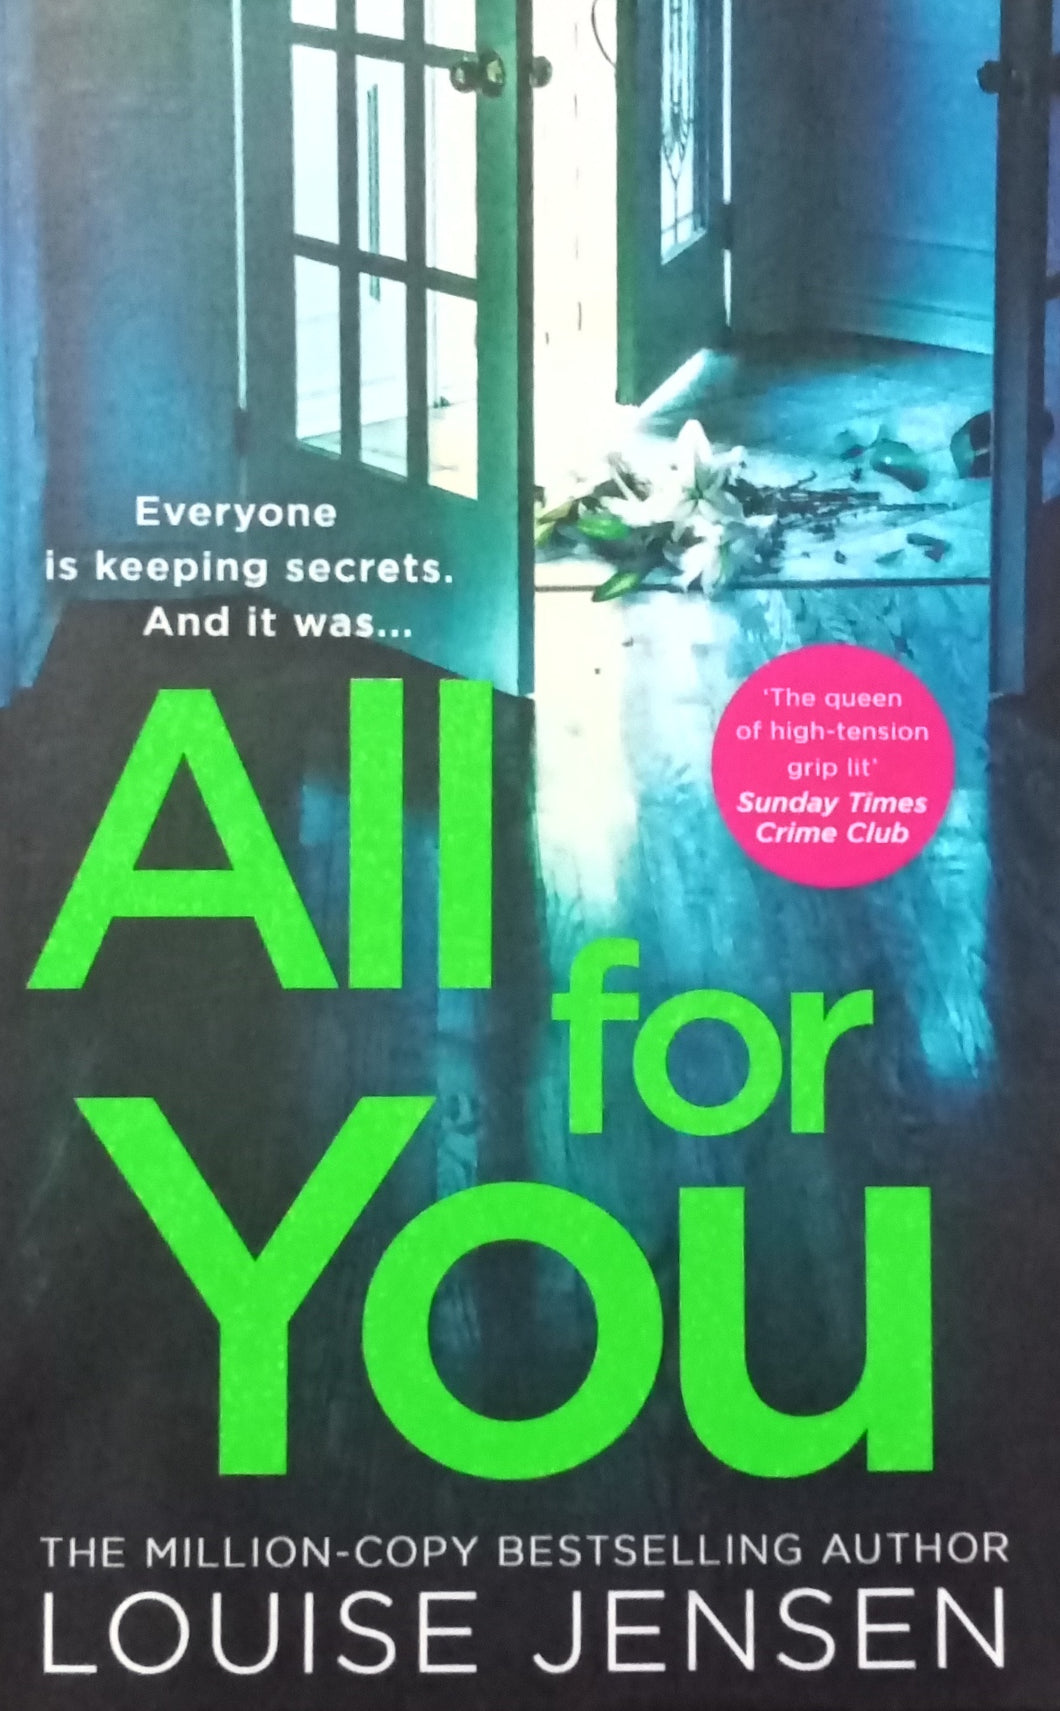 All for You by Louise Jensen